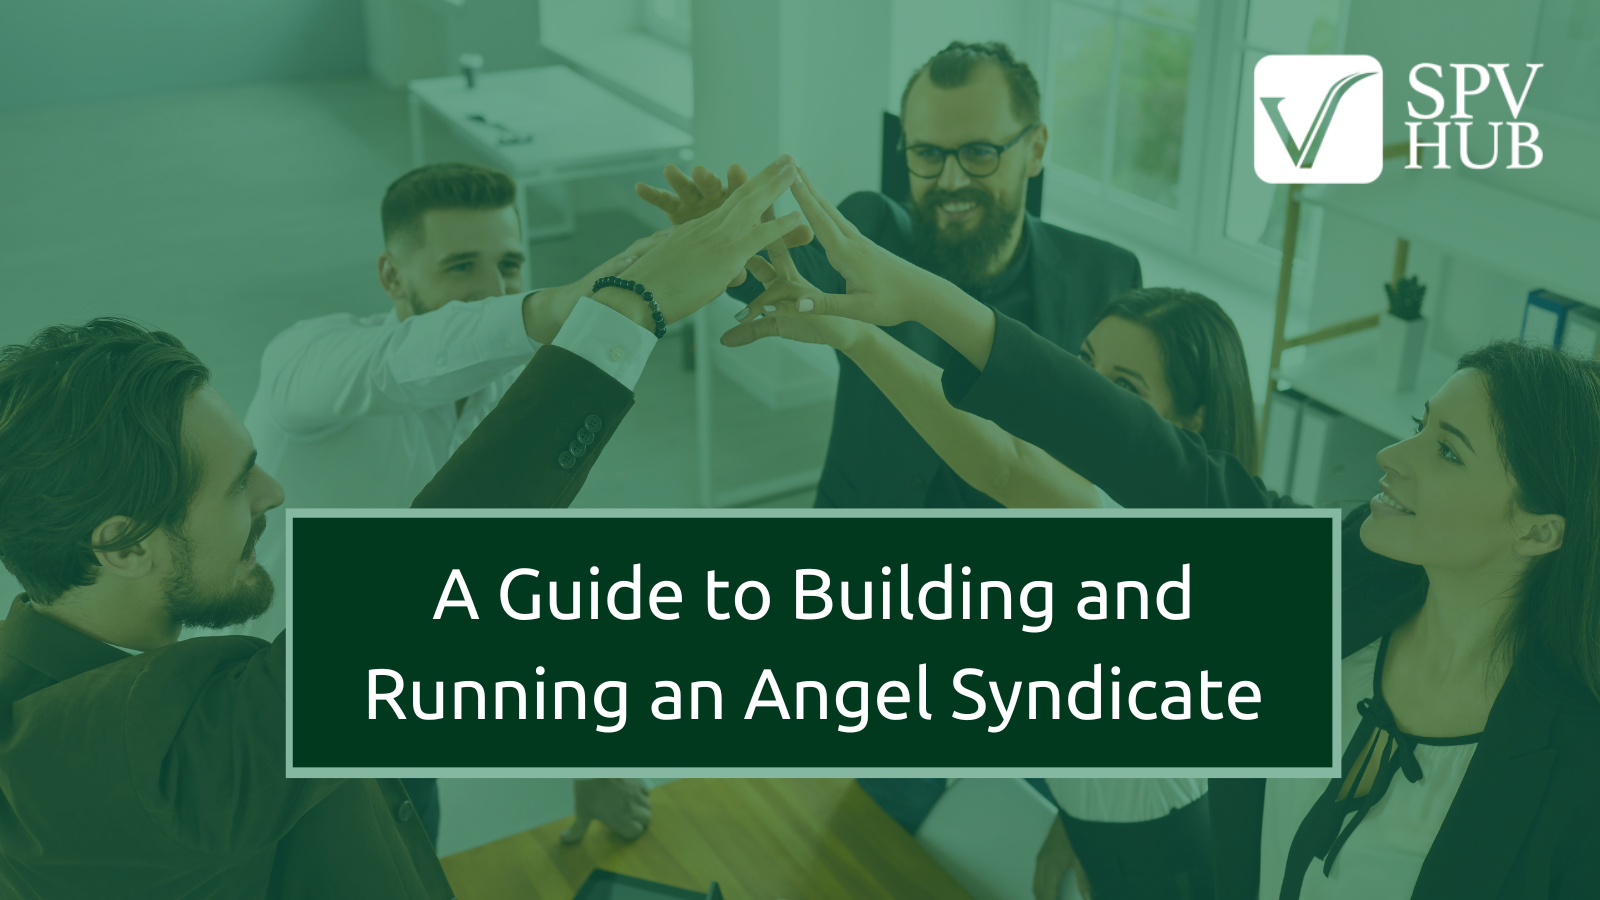 A Guide to Building and Running an Angel Syndicate